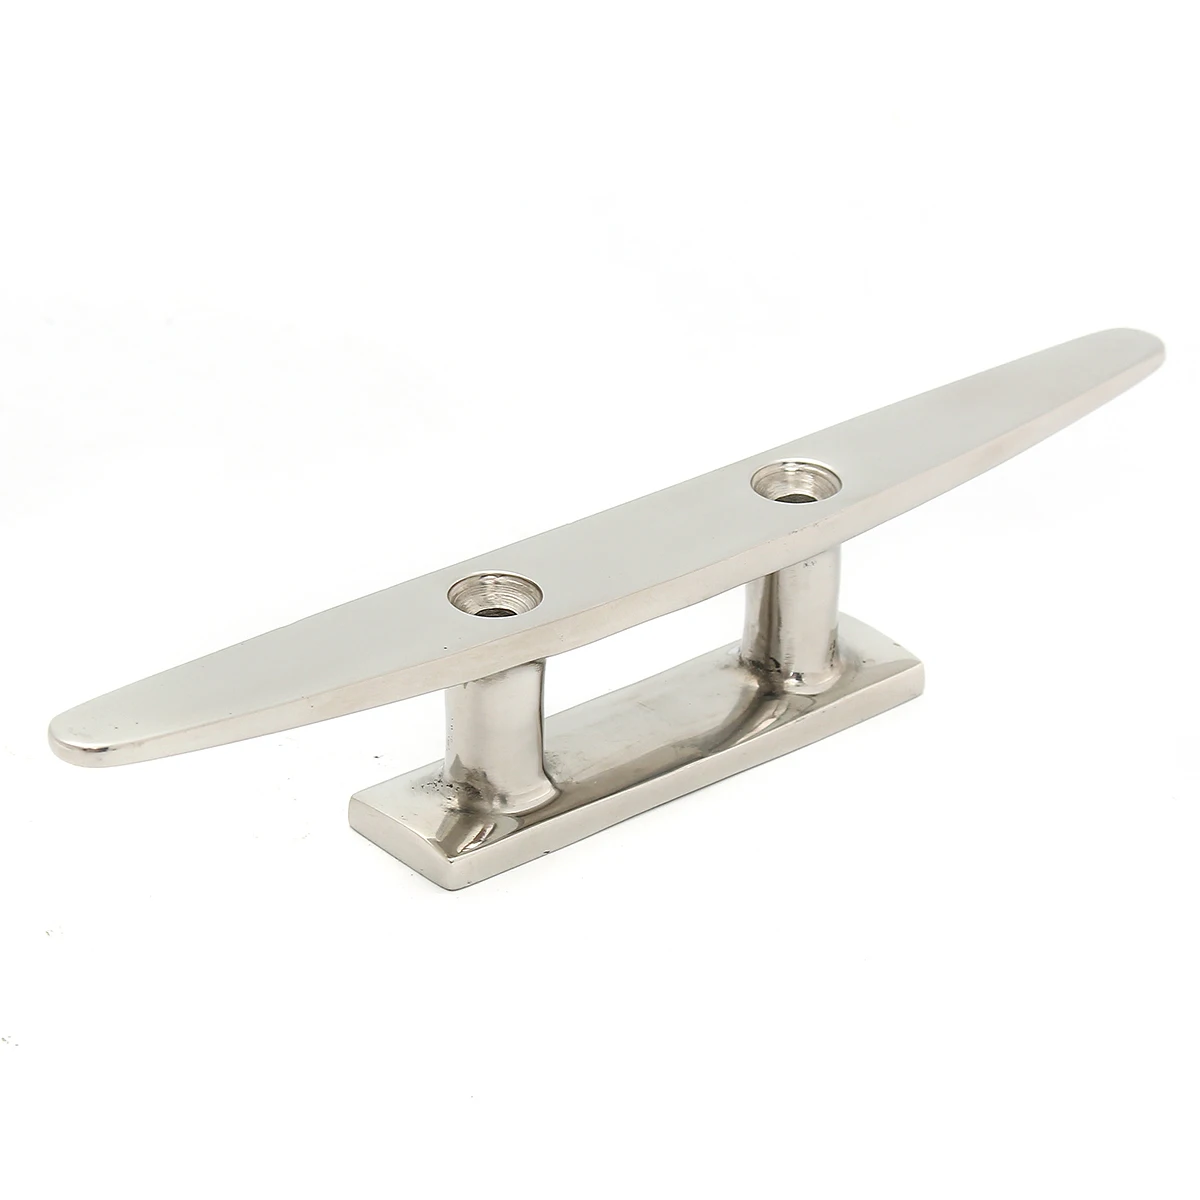 

4" 5" 6" 8" Low Flat Cleat 316 Stainless Steel 2 Hole Hardware For Marine Boat Deck Rope Tie for All Chandlery Applications